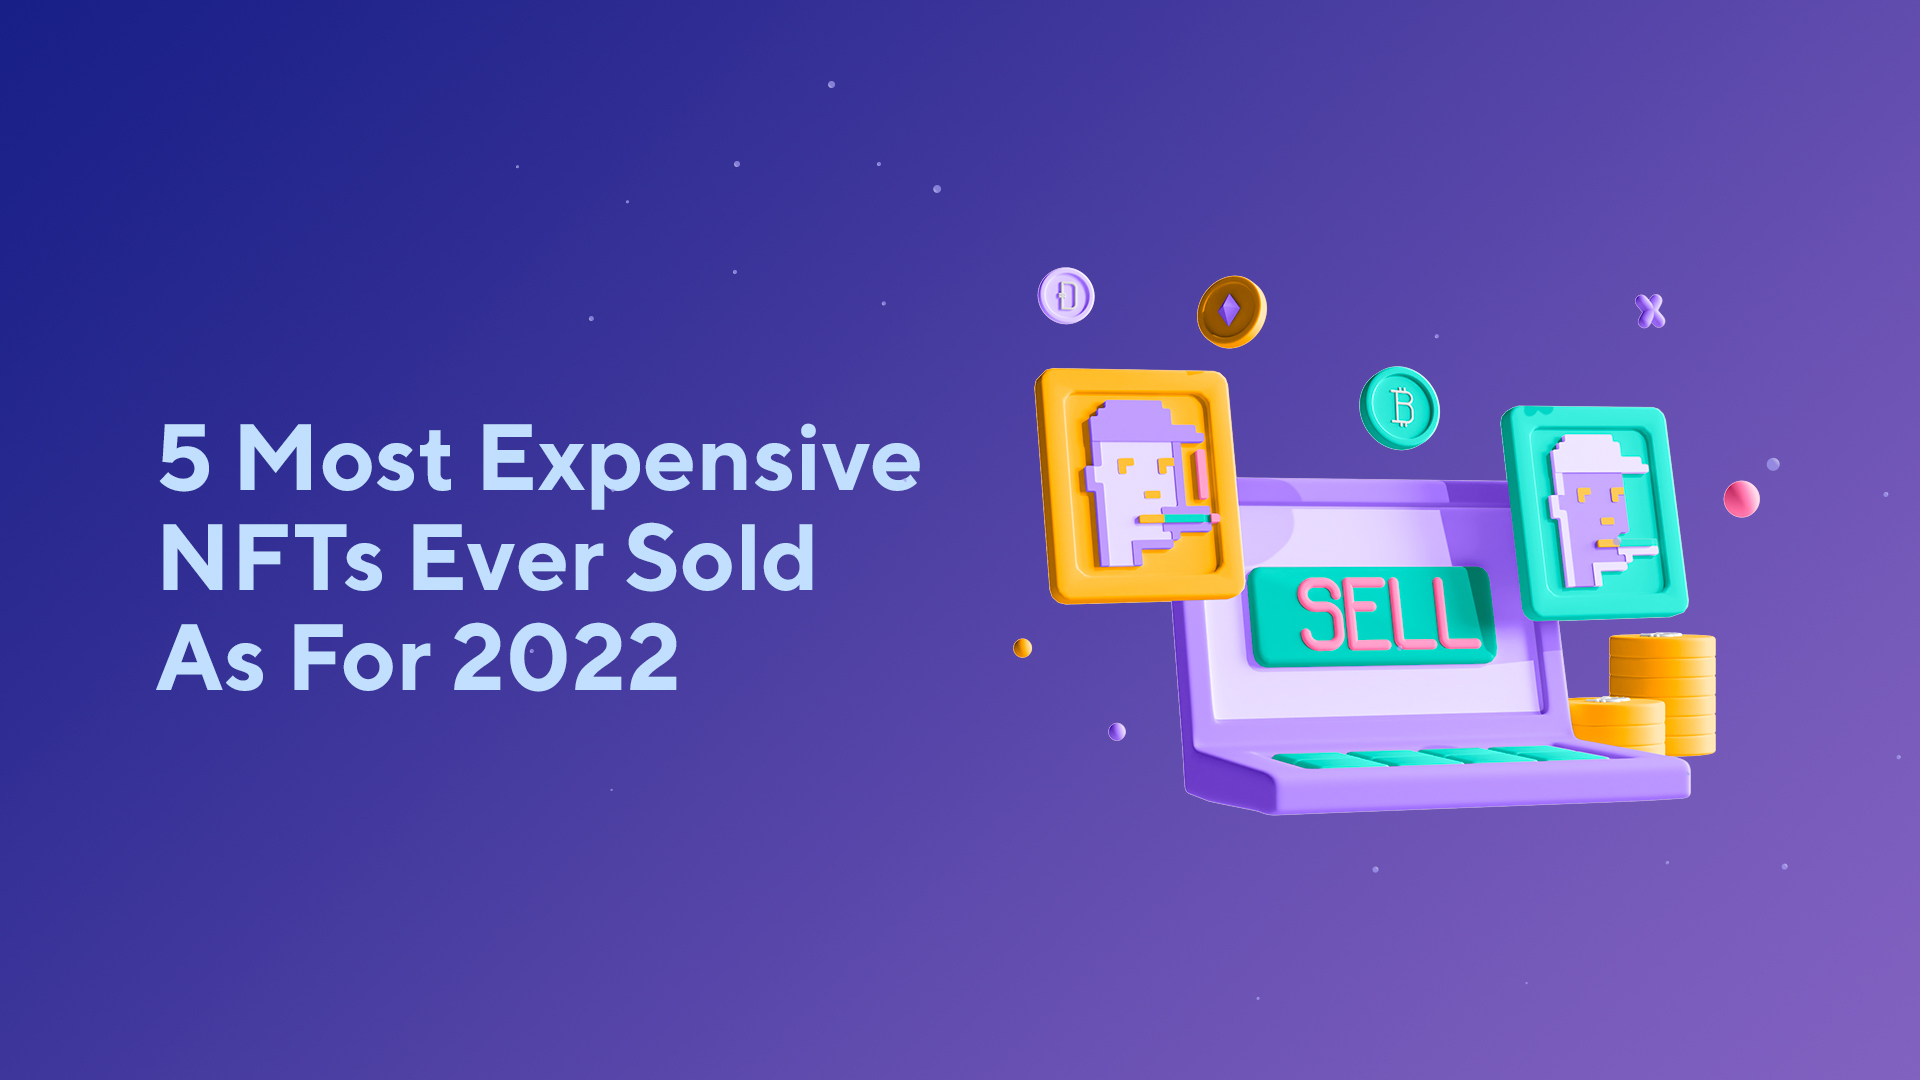 5 Most Expensive NFTs Ever Sold As For 2022